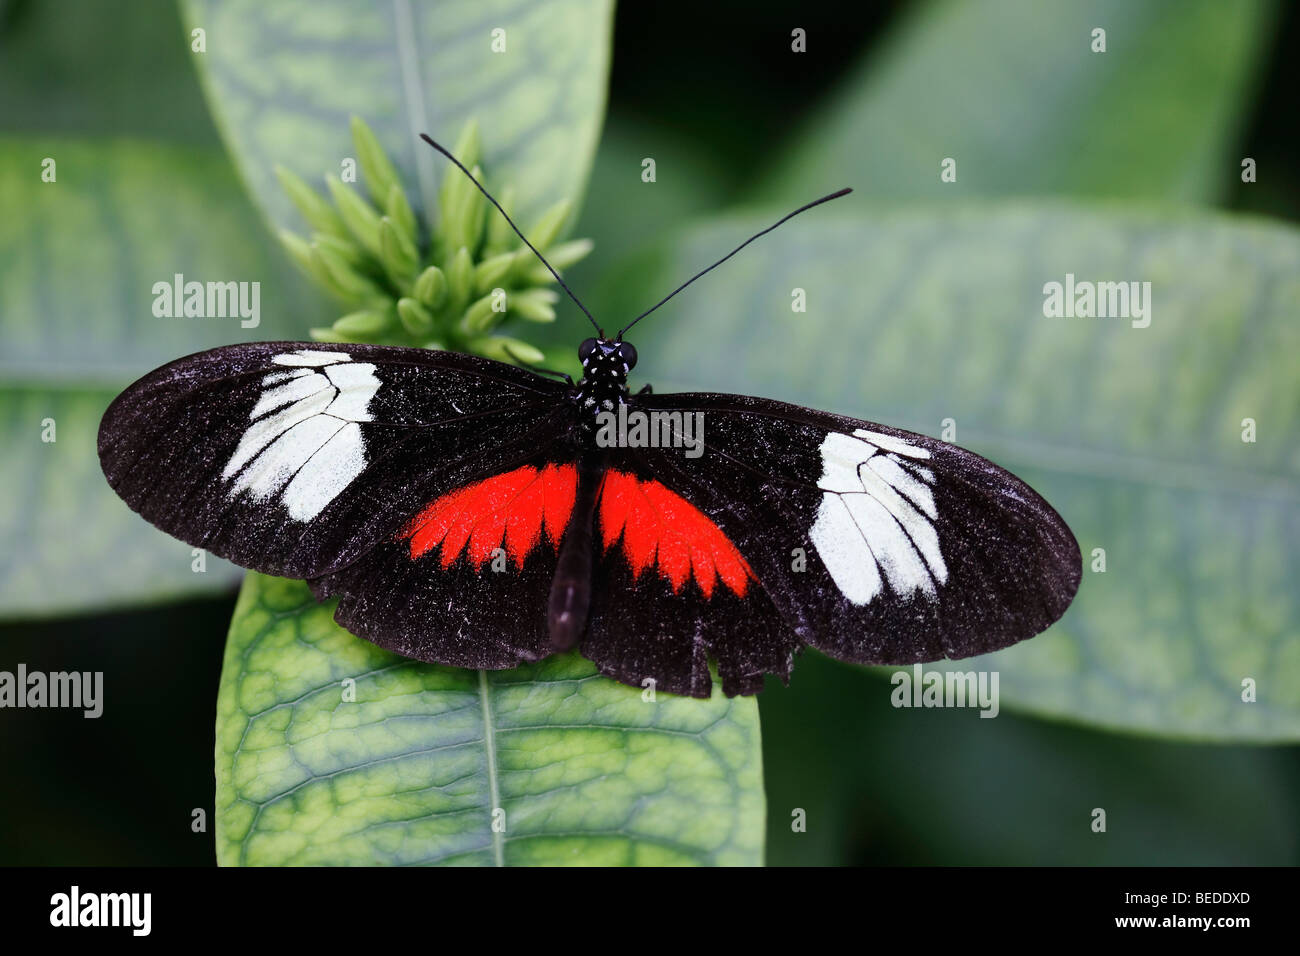 Passion vine butterfly (Heliconius), South America Stock Photo